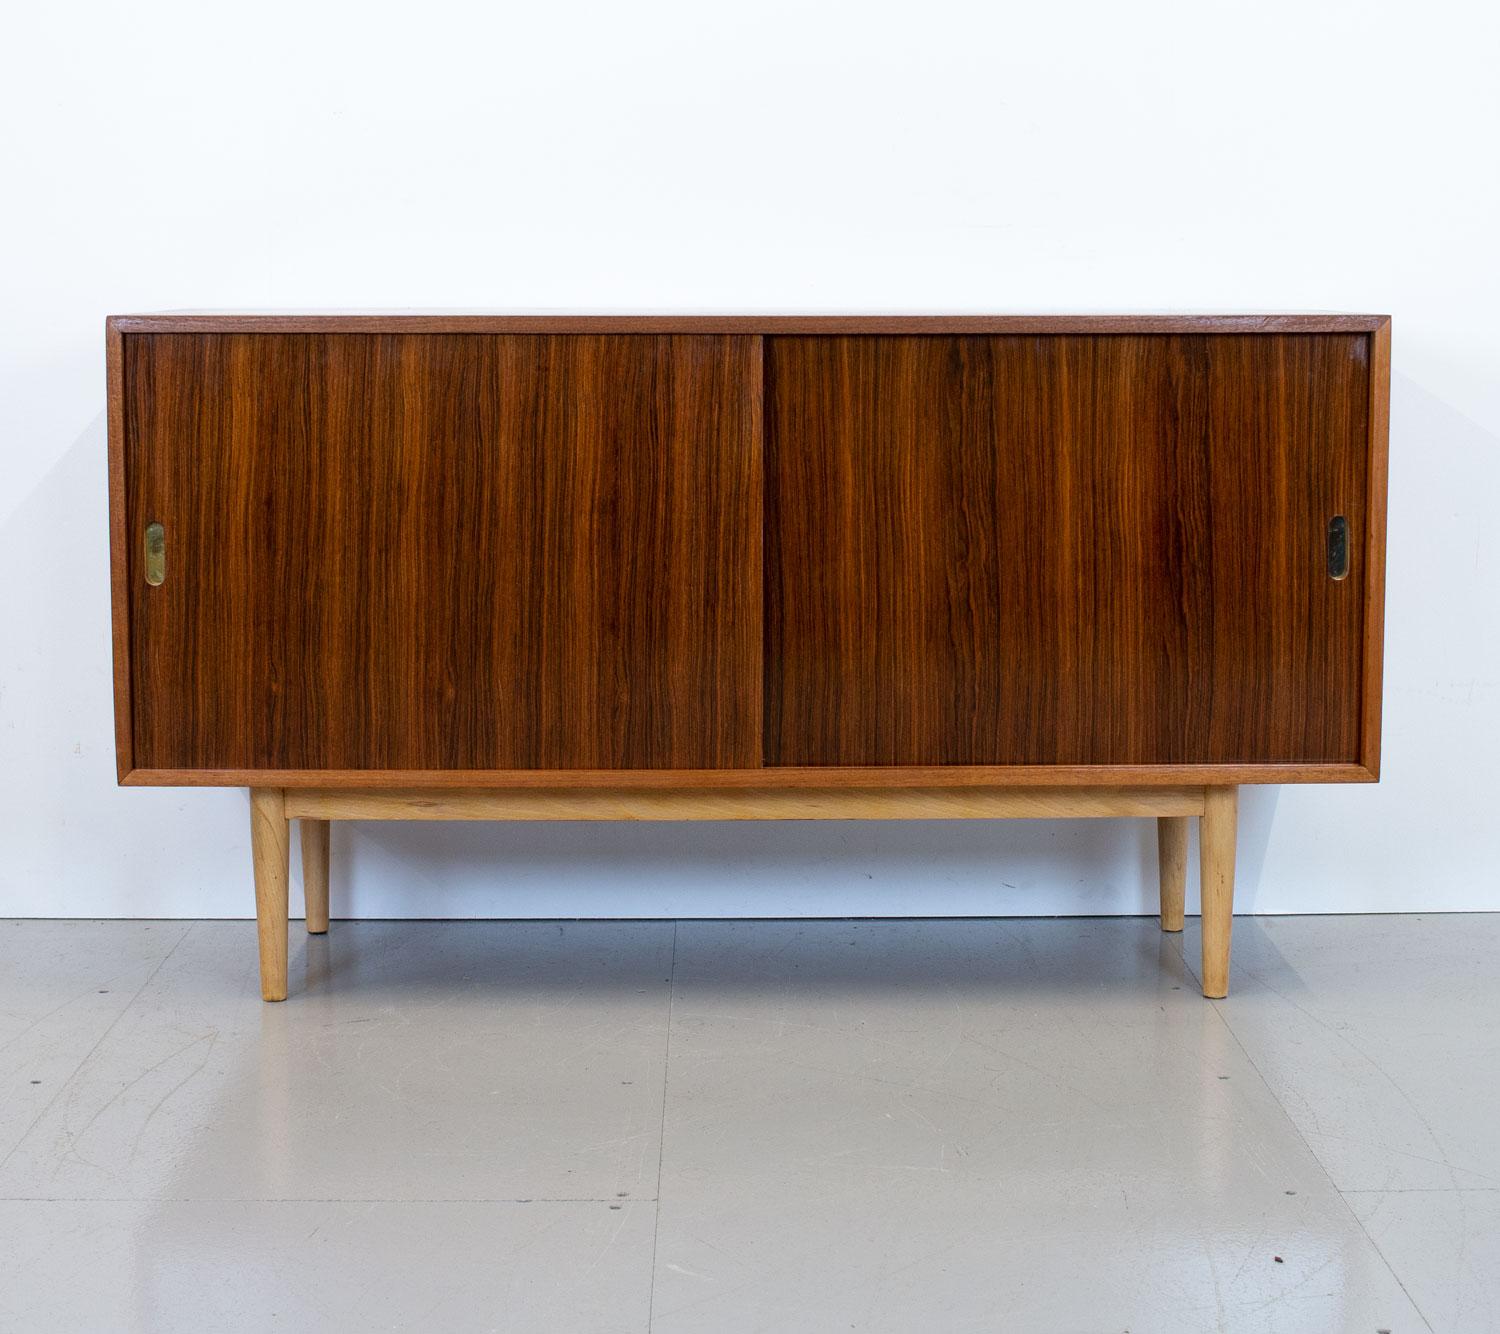 Unit ‘K’ sideboard designed by Robin Day as part of the Interplan range for Hille in 1954. It has a mahogany frame, rosewood sliding doors, beech legs and recessed brass handles. The interior contains 2 adjustable shelves one which has a cutaway